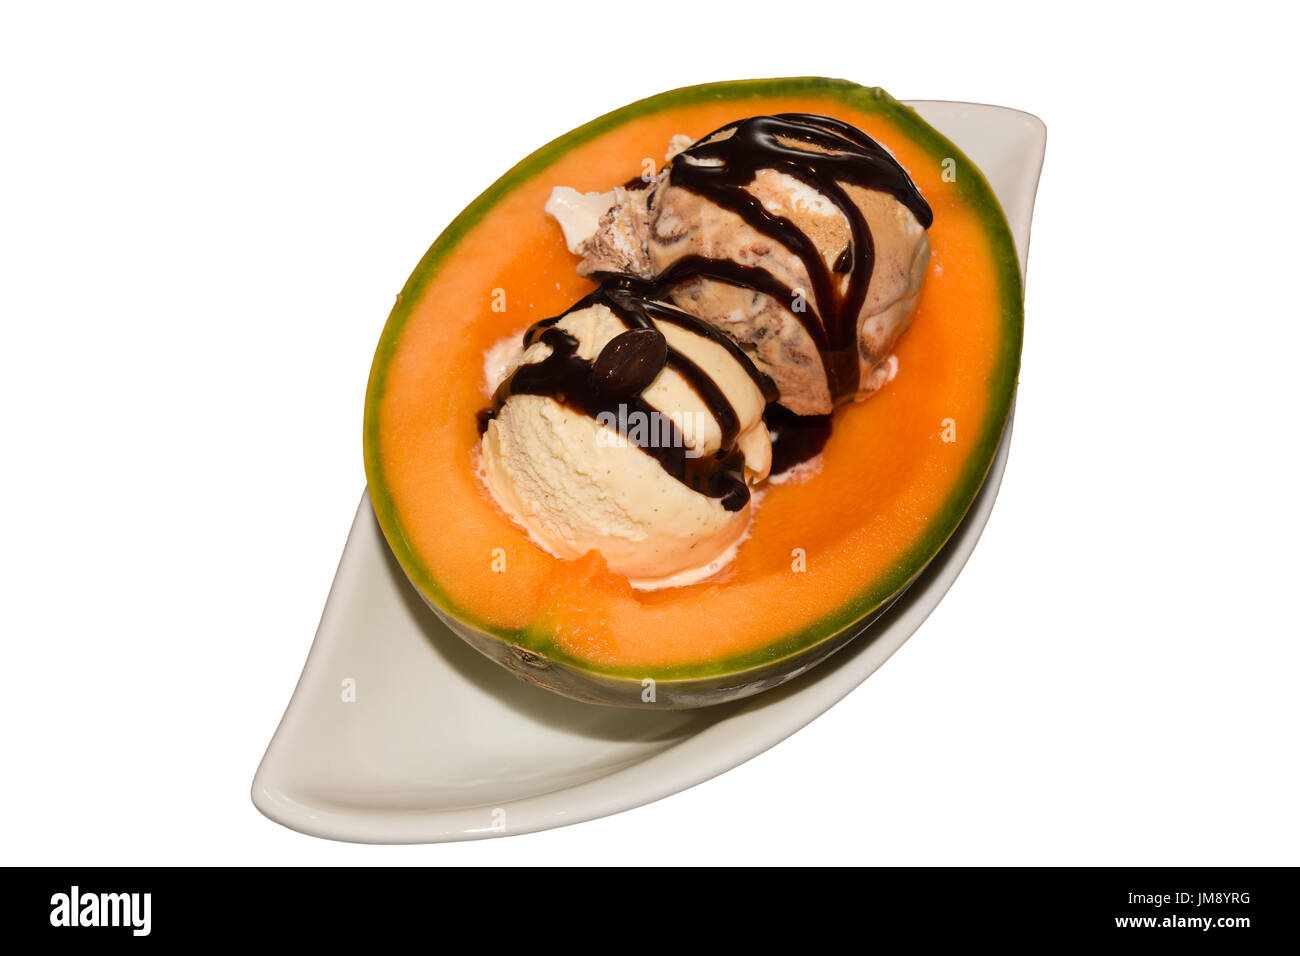 Melon filled with ice balls and garnish Stock Photo